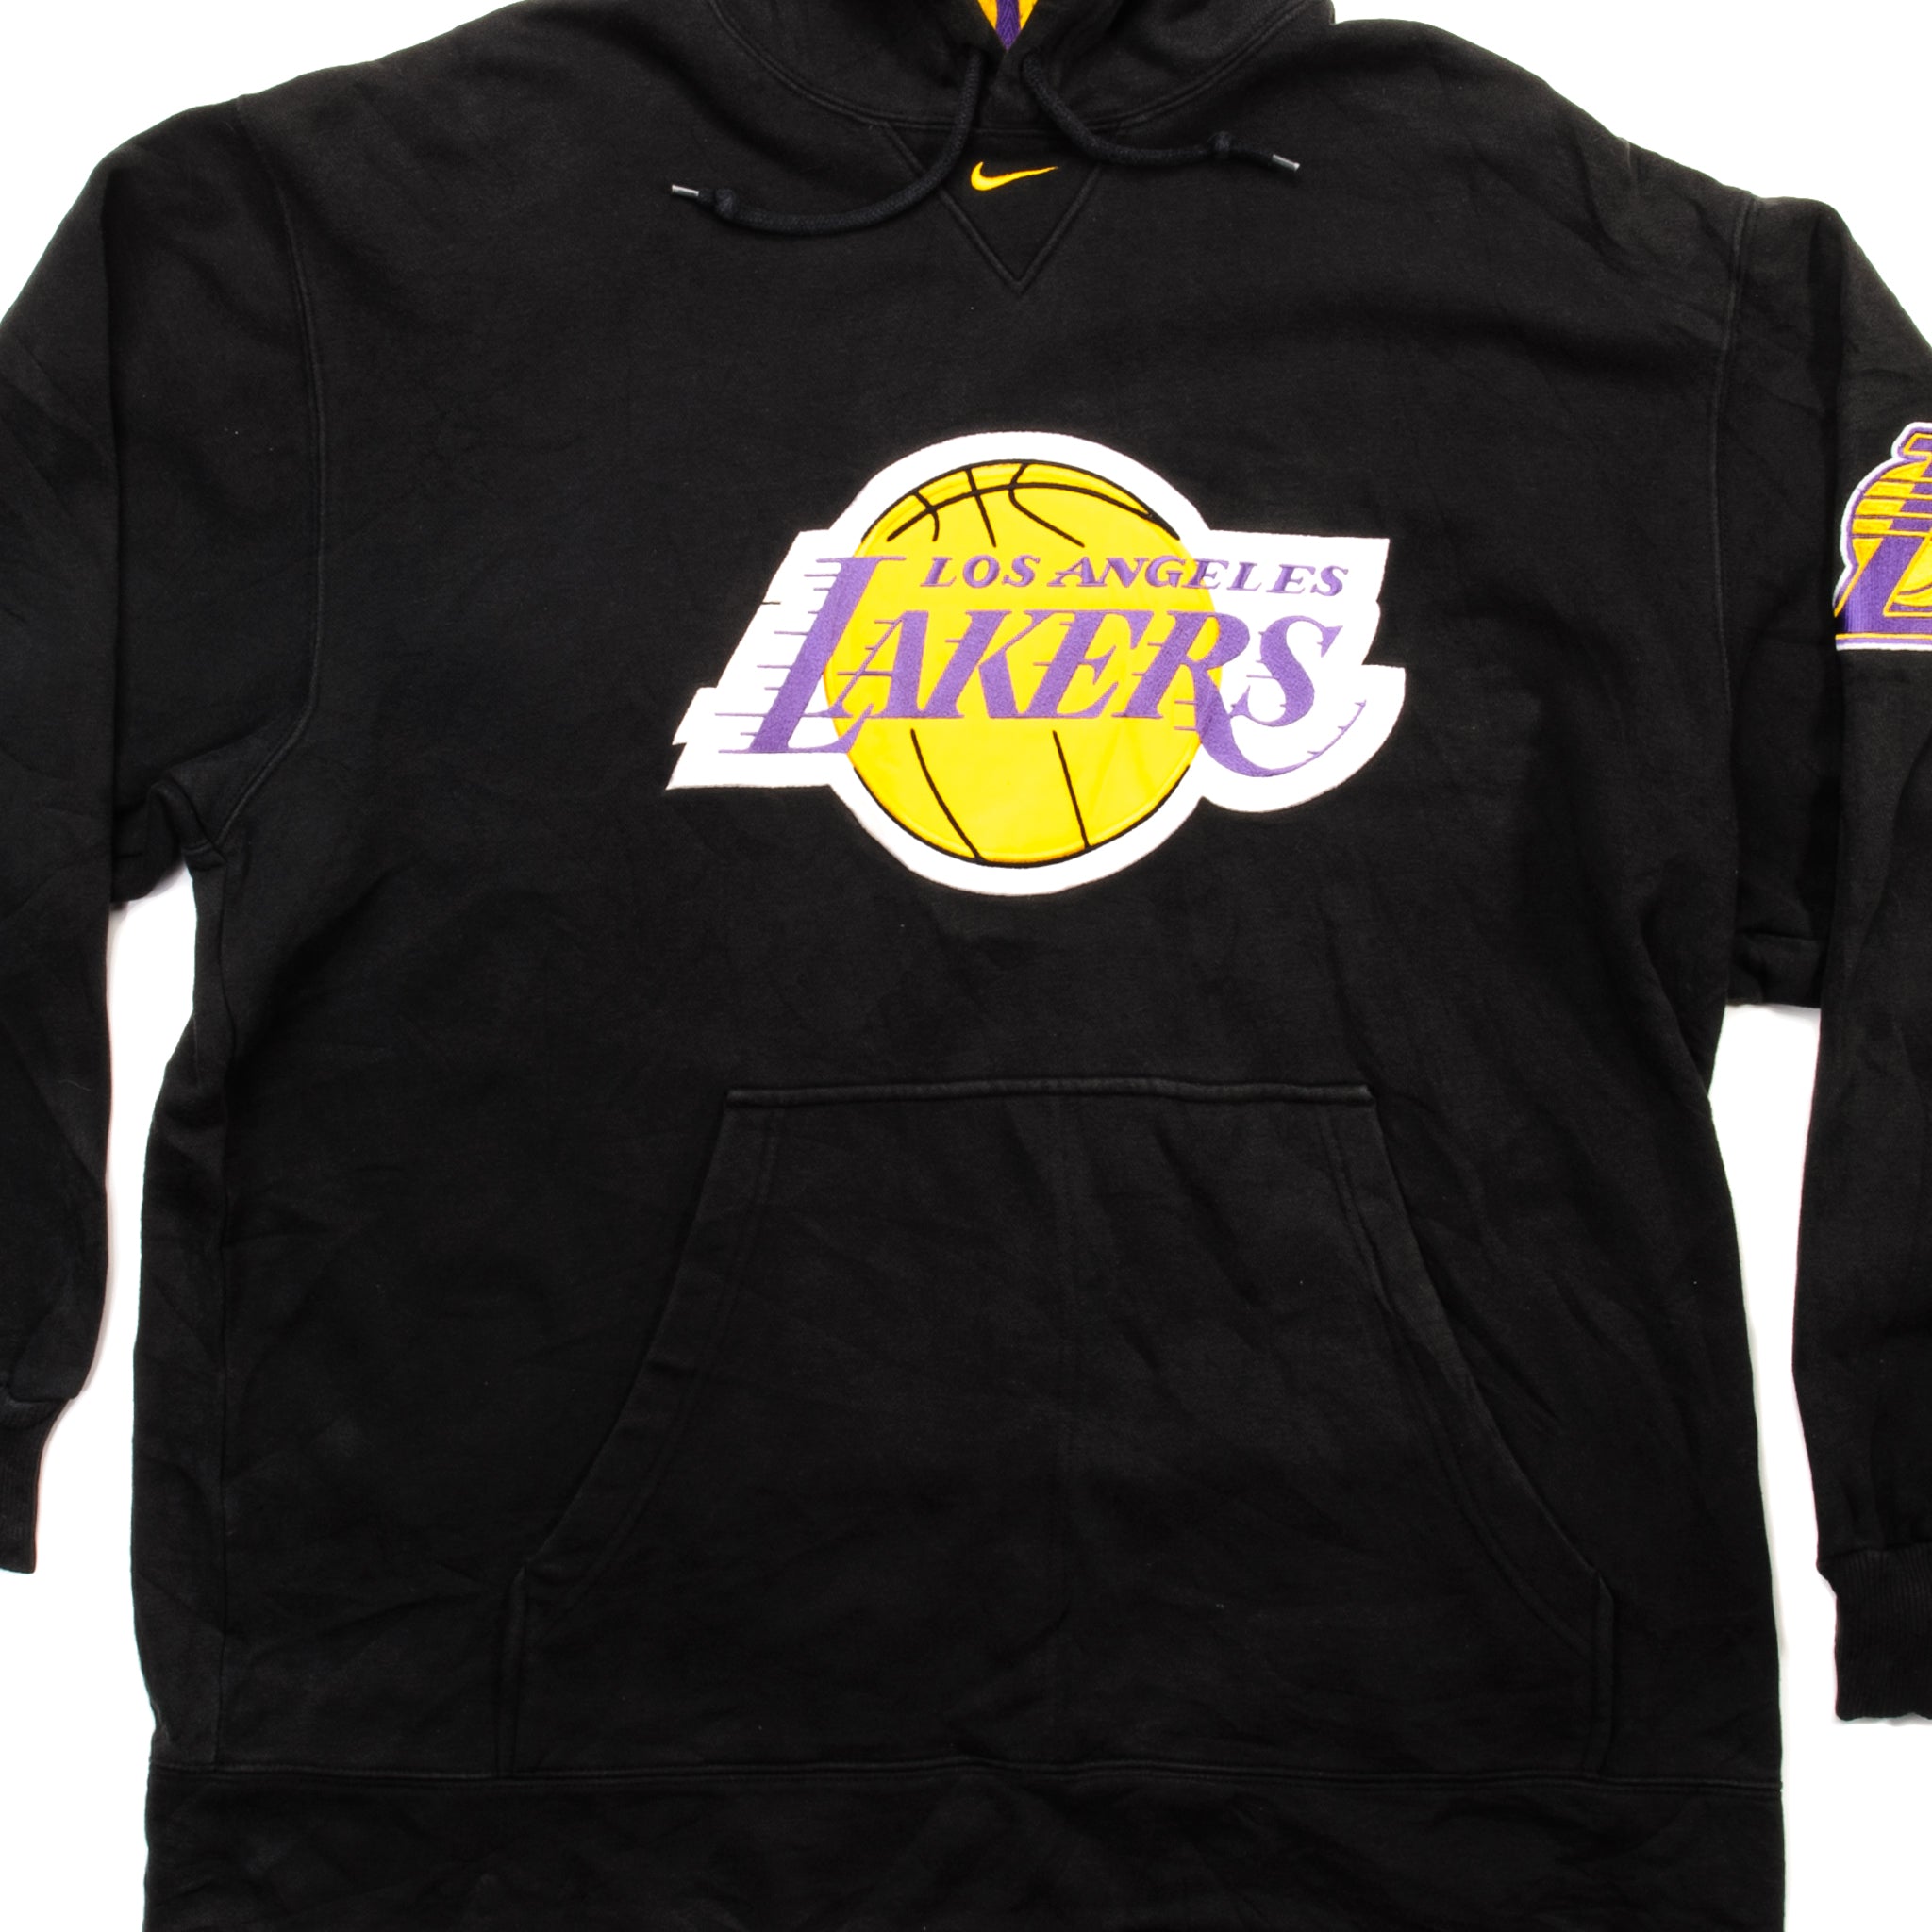 mulletguythriftscore Vintage NBA Los Angeles Lakers Sweatshirt Big Printed American Basketball Team Pullover Fits Size S-M Adult